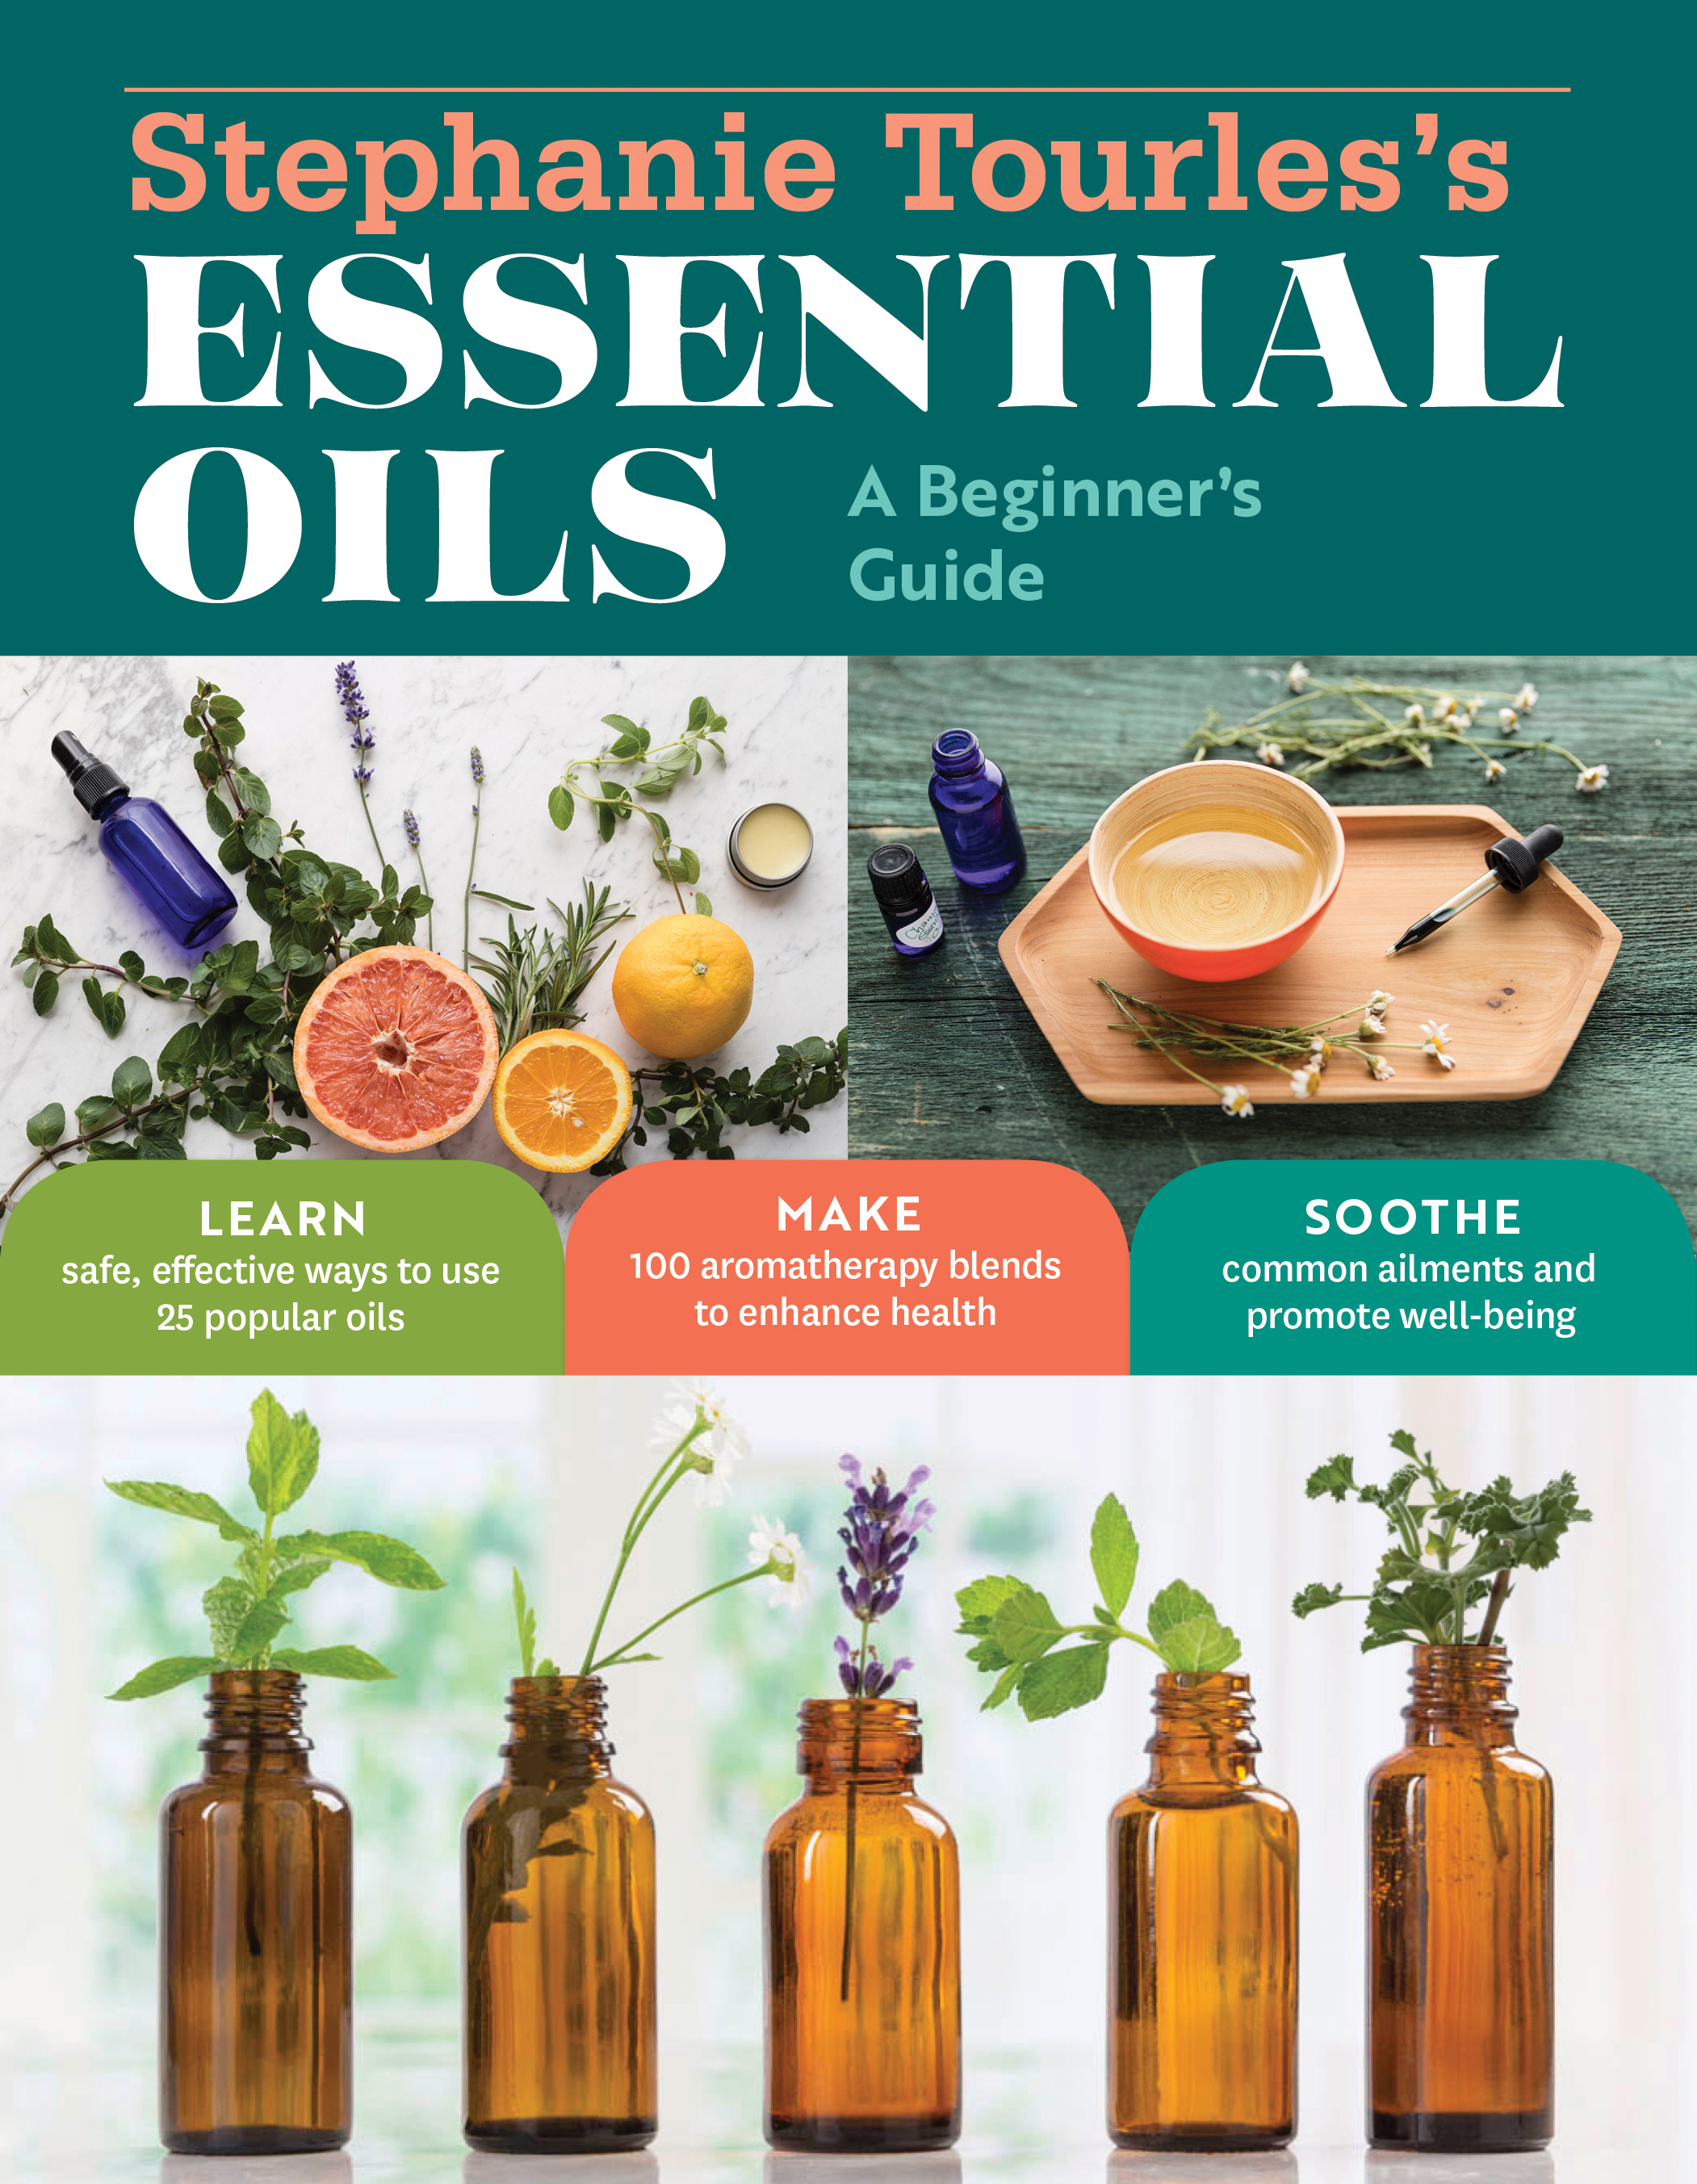 An Essential Oils Guide for Beginners